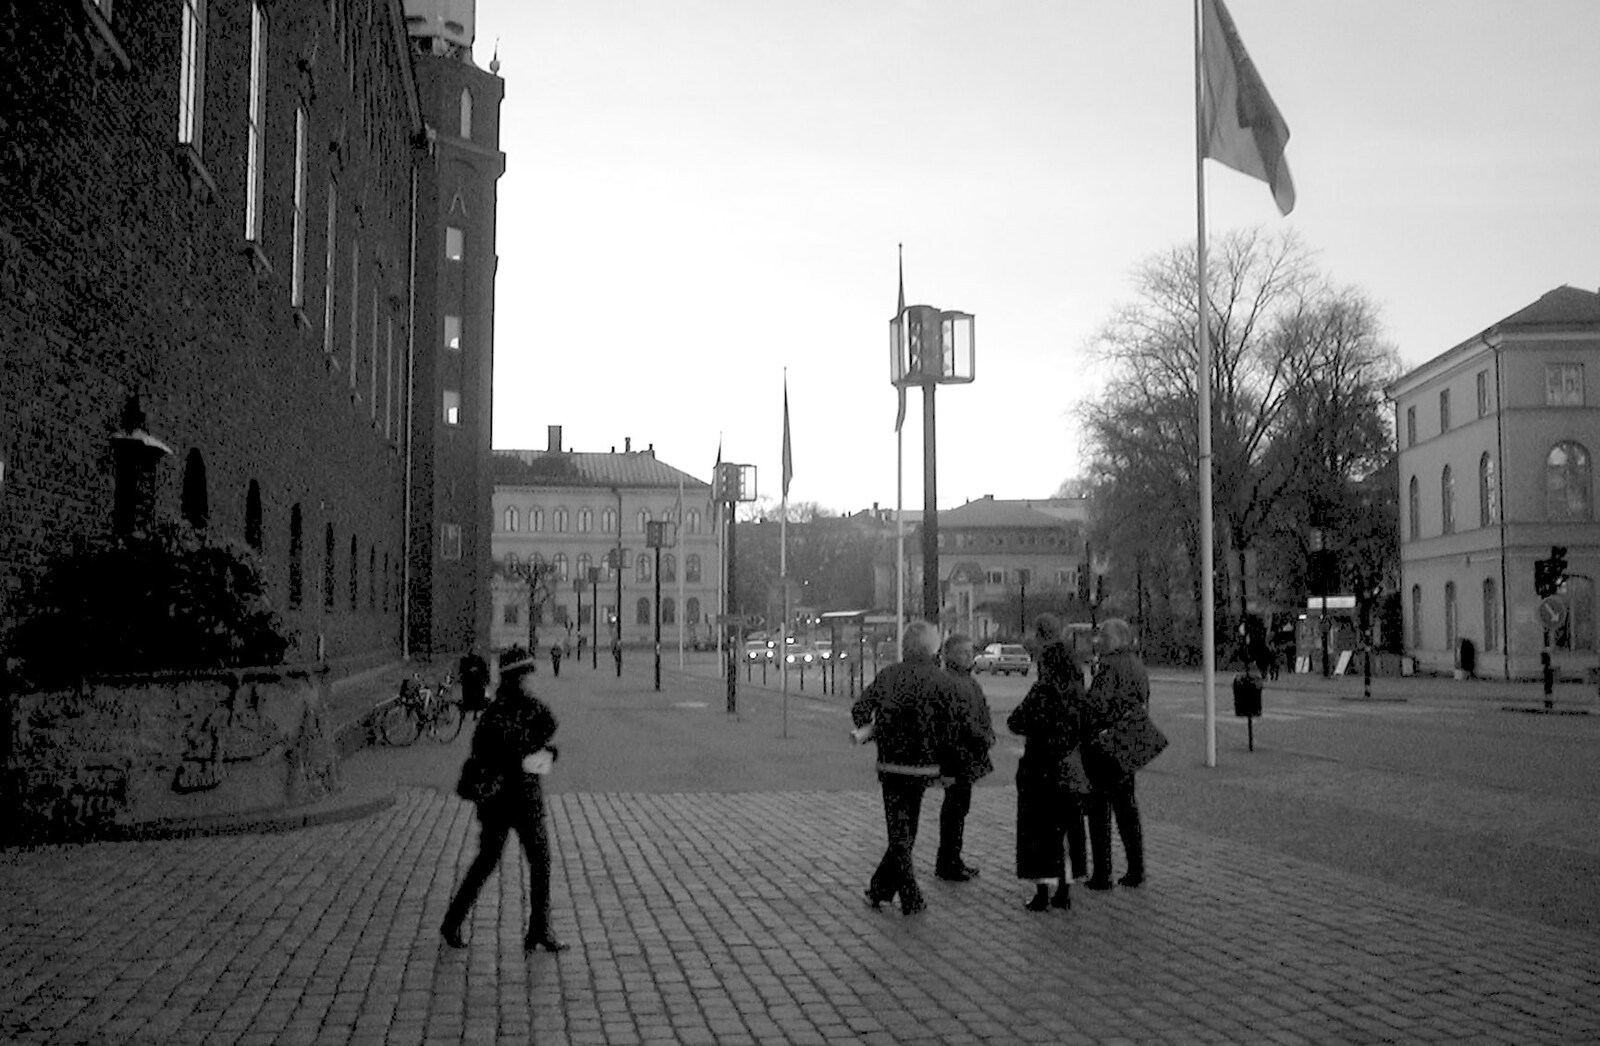 Outside the Stadshuset from A 3G Lab Press Tour of Helsinki and Stockholm, Finland and Sweden - 12th March 2001